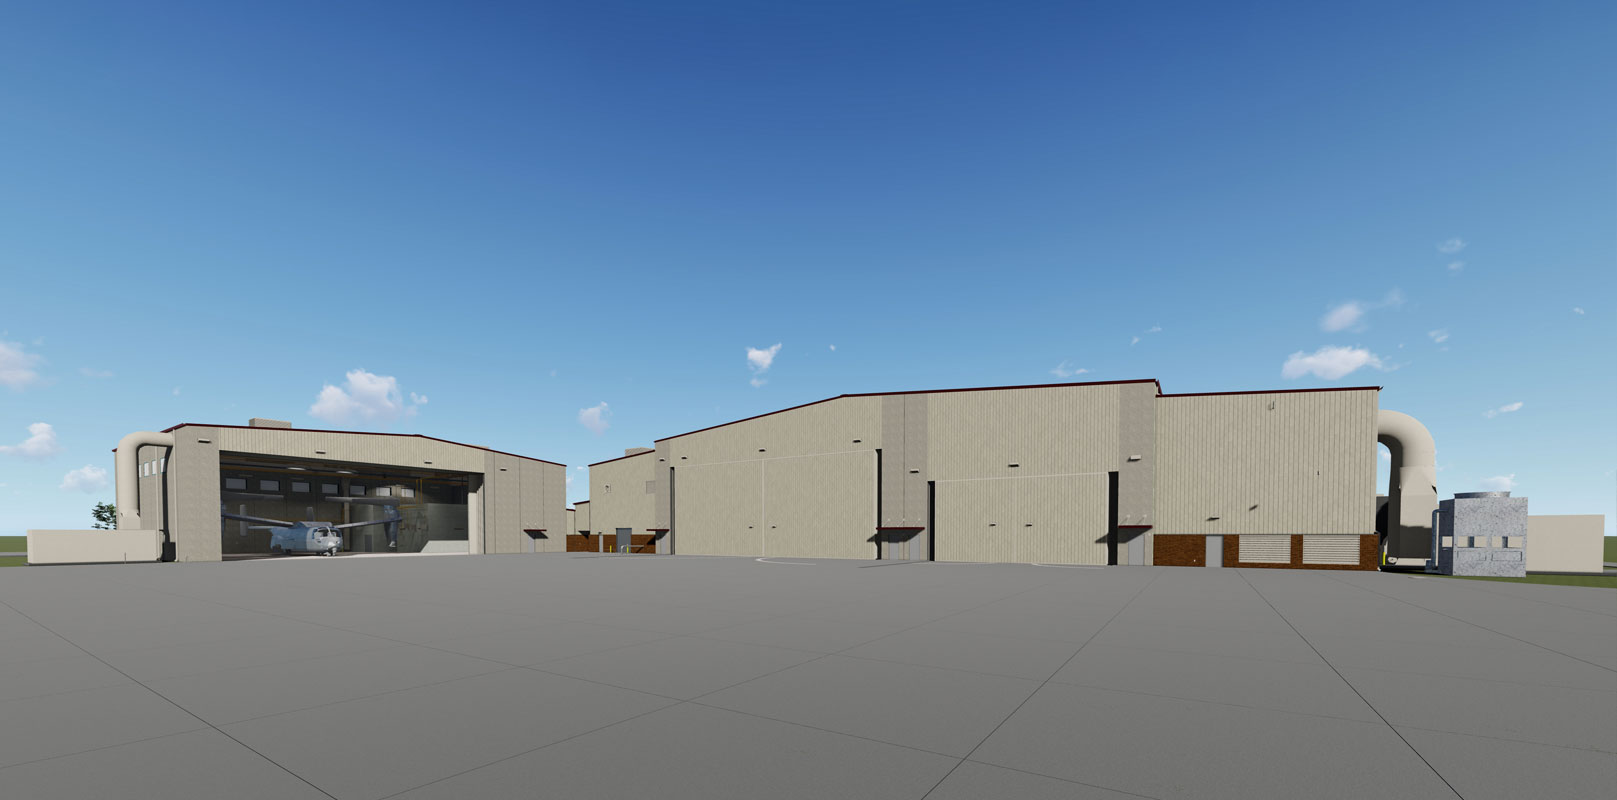 P-1035 Corrosion Control and Paint Facility at Naval Station Norfolk; rendering © Clark Nexsen